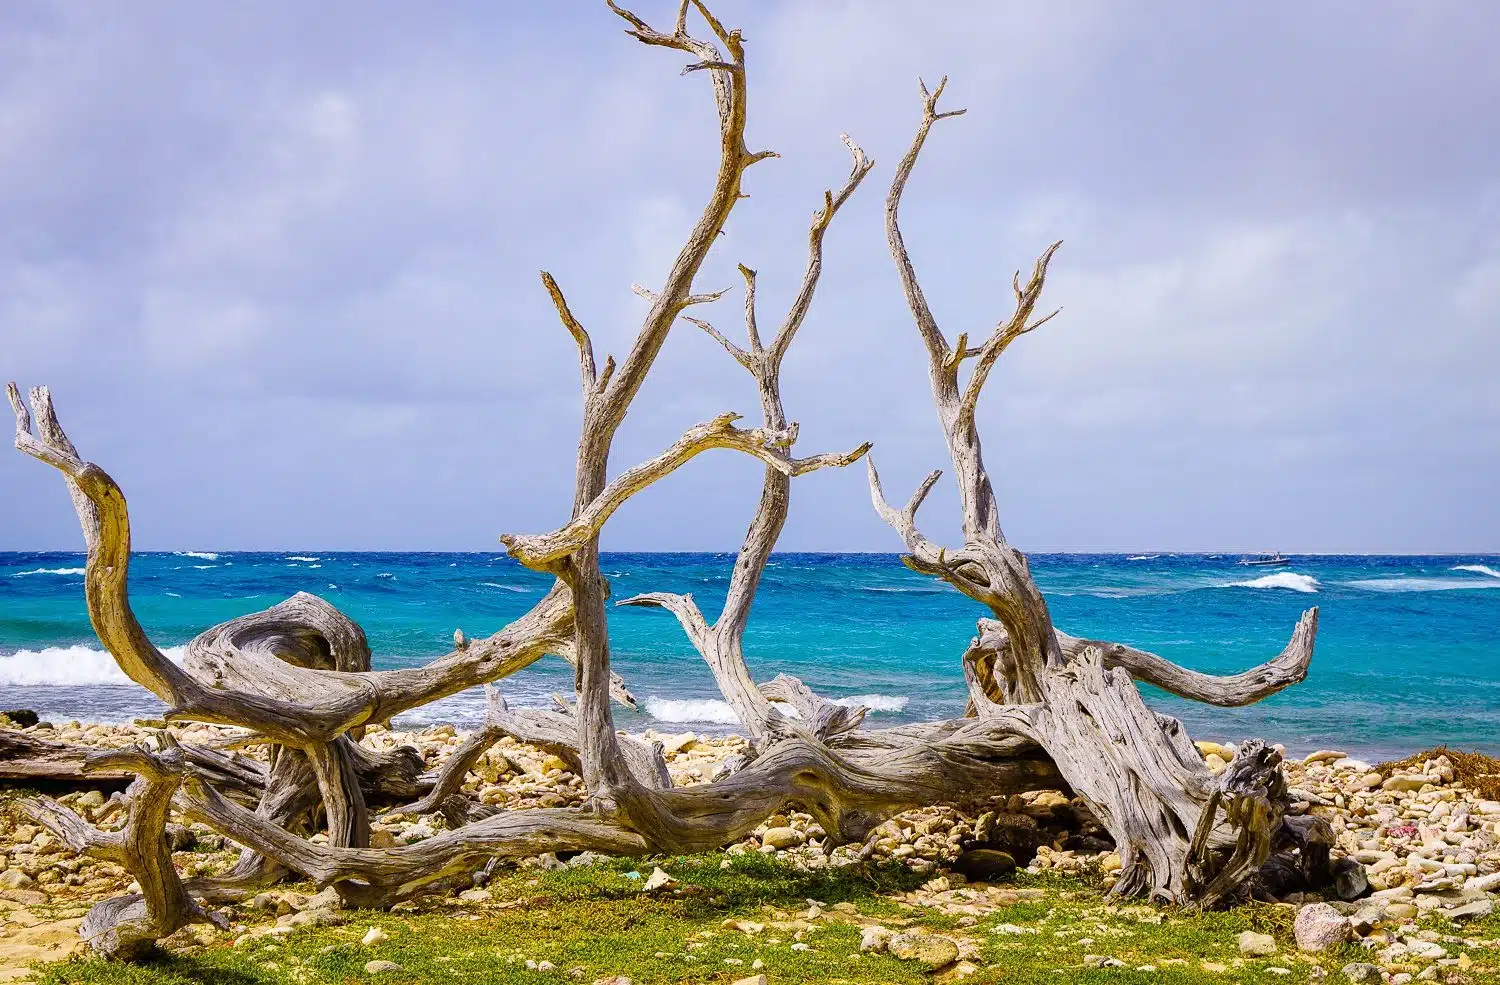 Twisted branches in front of bright teal ocean.